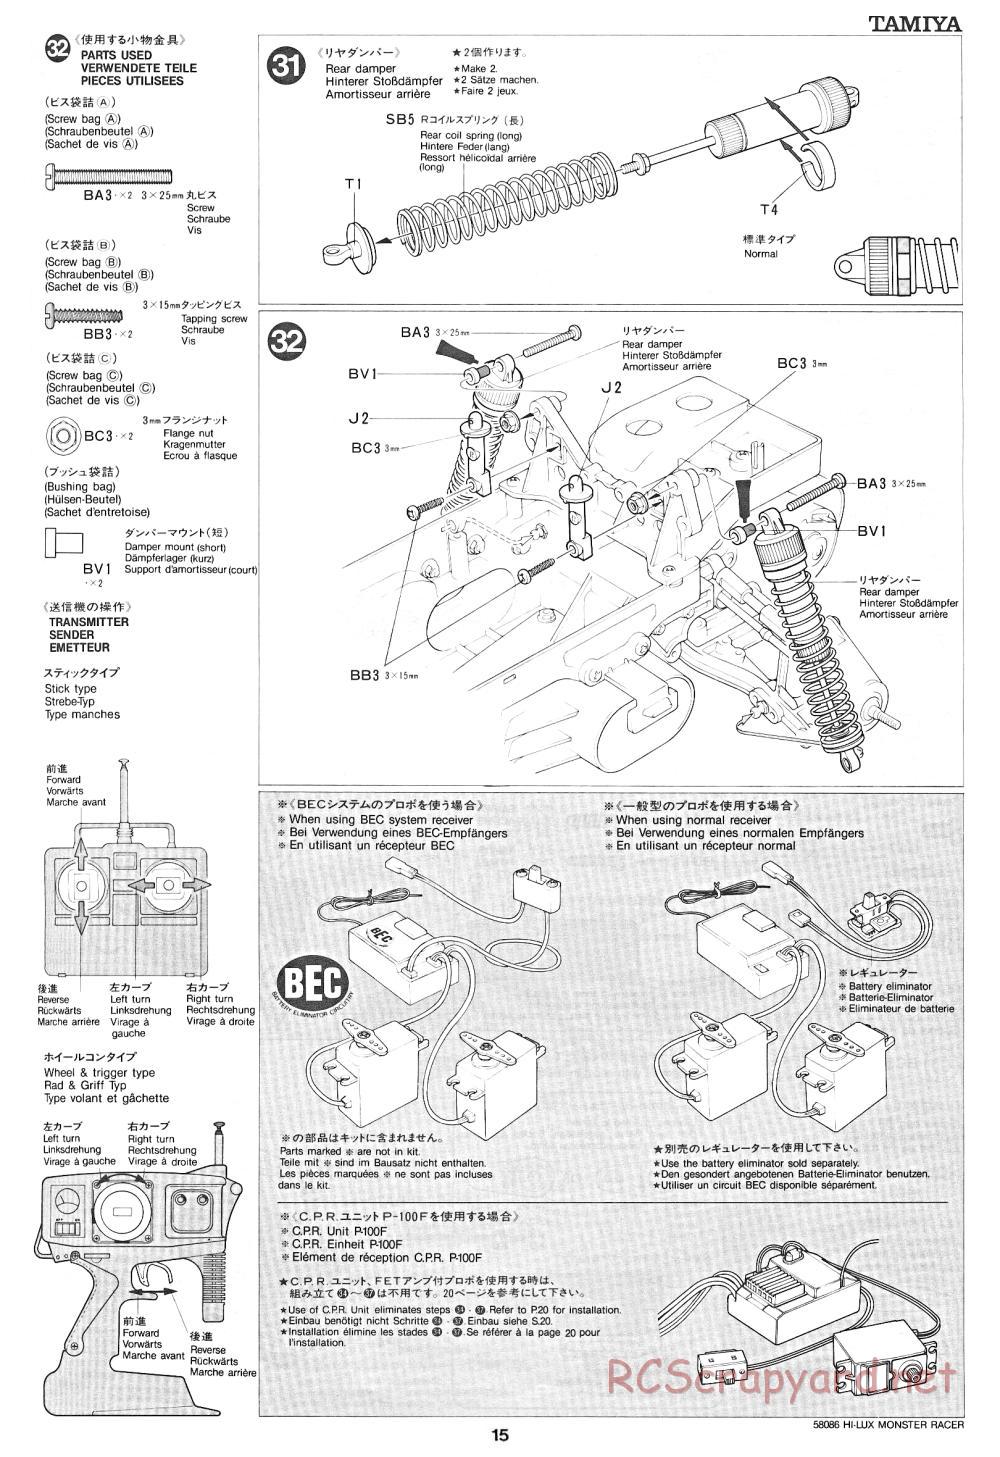 Tamiya - Toyota Hilux Monster Racer - 58086 - Manual - Page 15